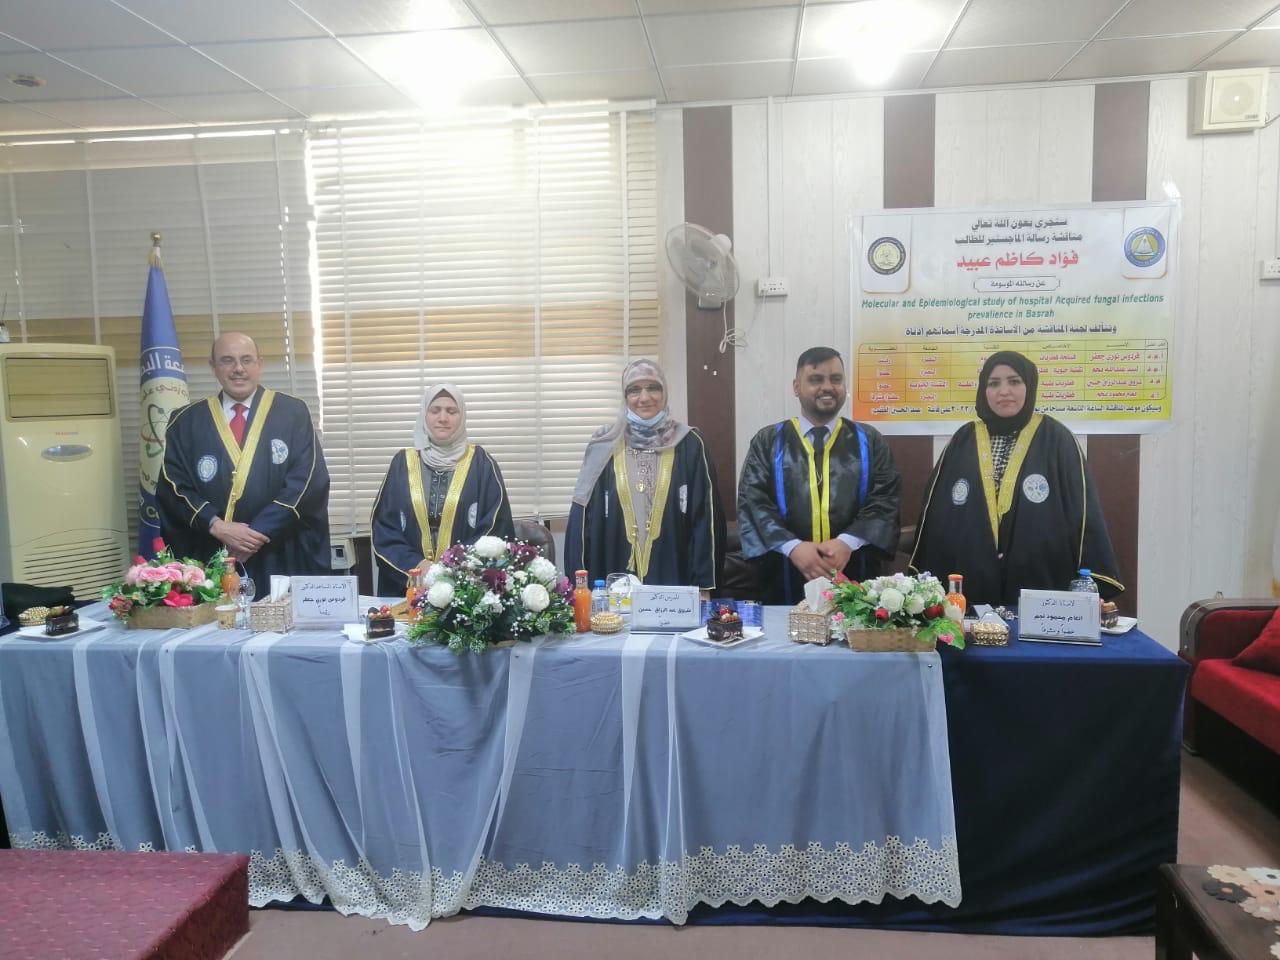 A faculty member at the College of Pharmacy at the University of Basrah is a member of the Master's thesis discussion committee